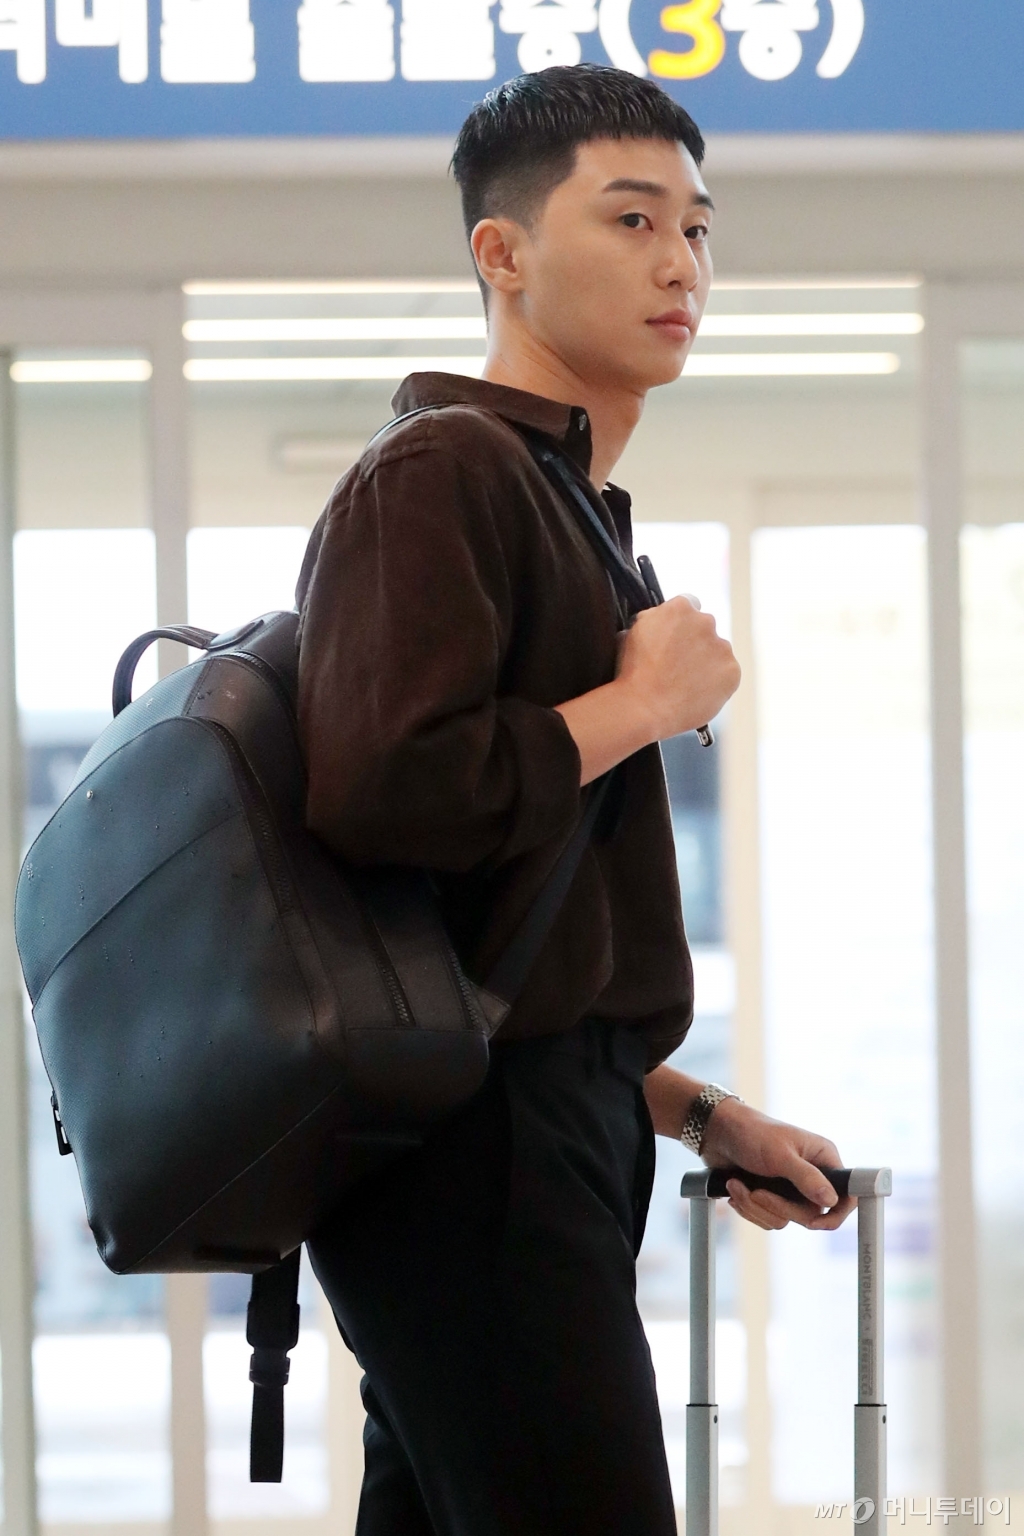 Actor Park Seo-joon is departing to Taiwan through Incheon International Airport on the morning of the 29th for overseas schedule.Actor Park Seo-joon is departing to Taiwan through Incheon International Airport on the morning of the 29th for overseas schedule.